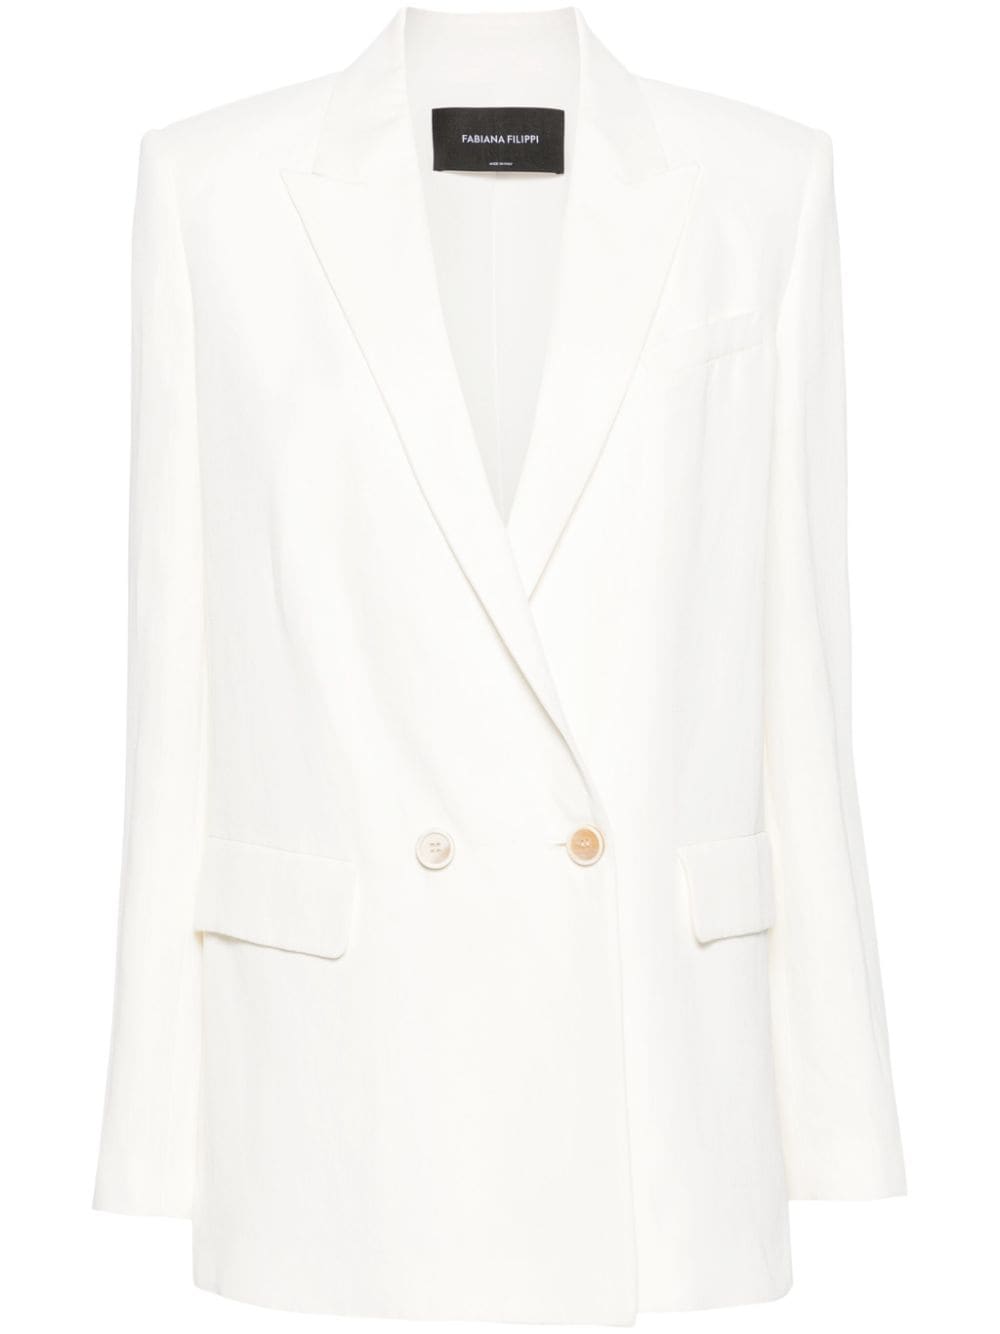 FABIANA FILIPPI White Double-Breasted Blazer Jacket for Women with Peak Lapels and Shoulder Pads